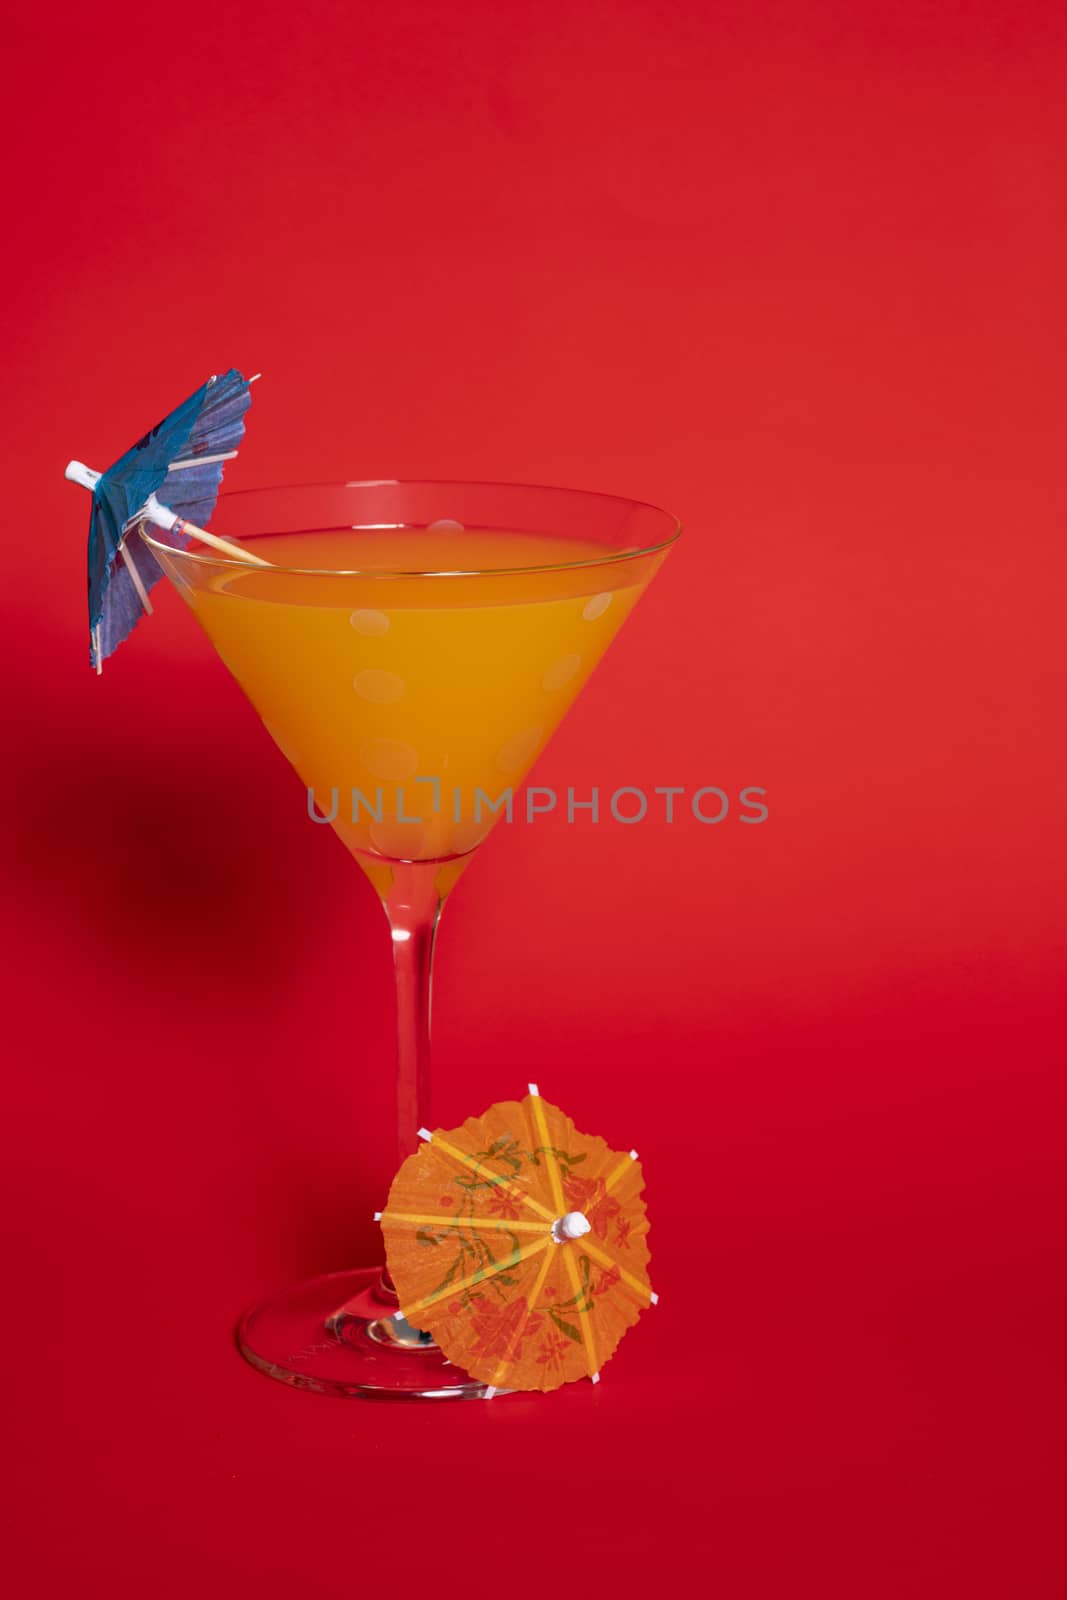 Orange Drink in Martini Glass Against Red by CharlieFloyd